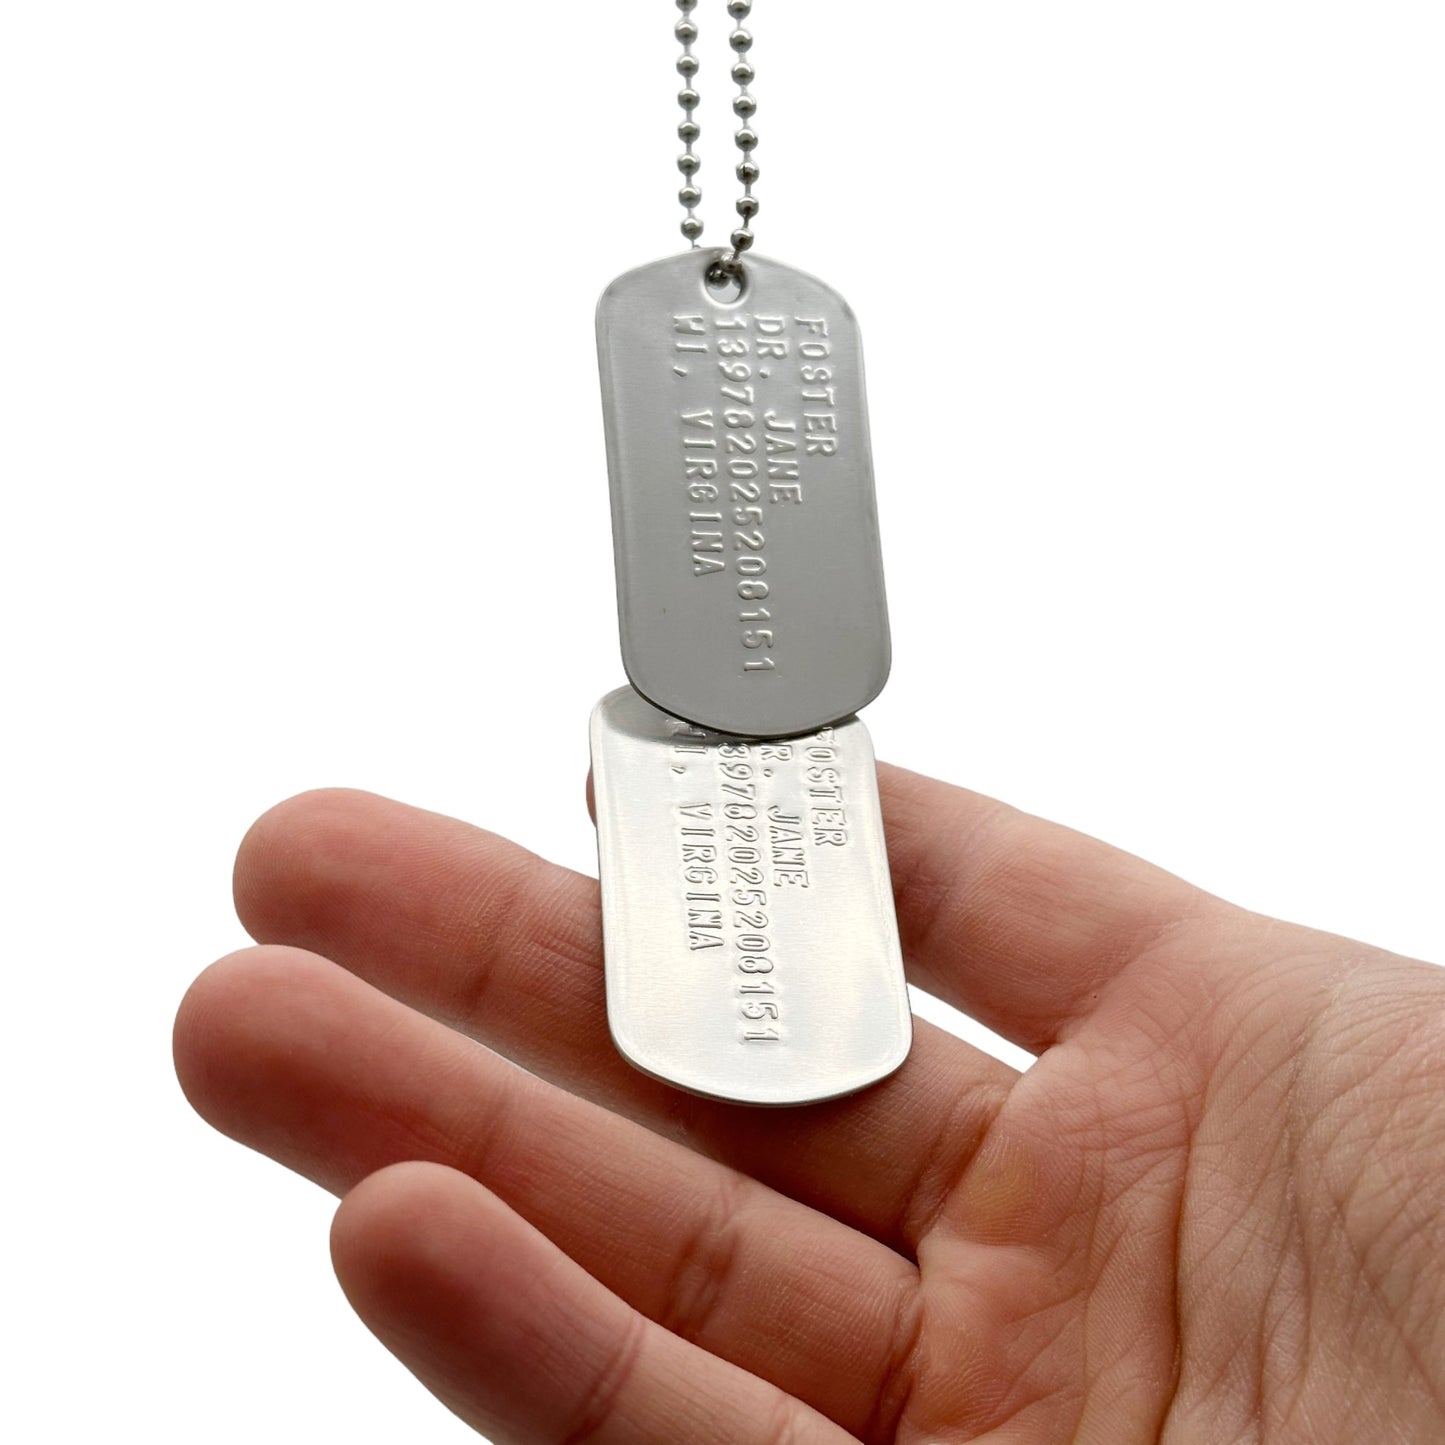 'JANE FOSTER' Dog Tags - Costume Cosplay Prop Replica Military - Stainless Steel Chains Included - TheDogTagCo